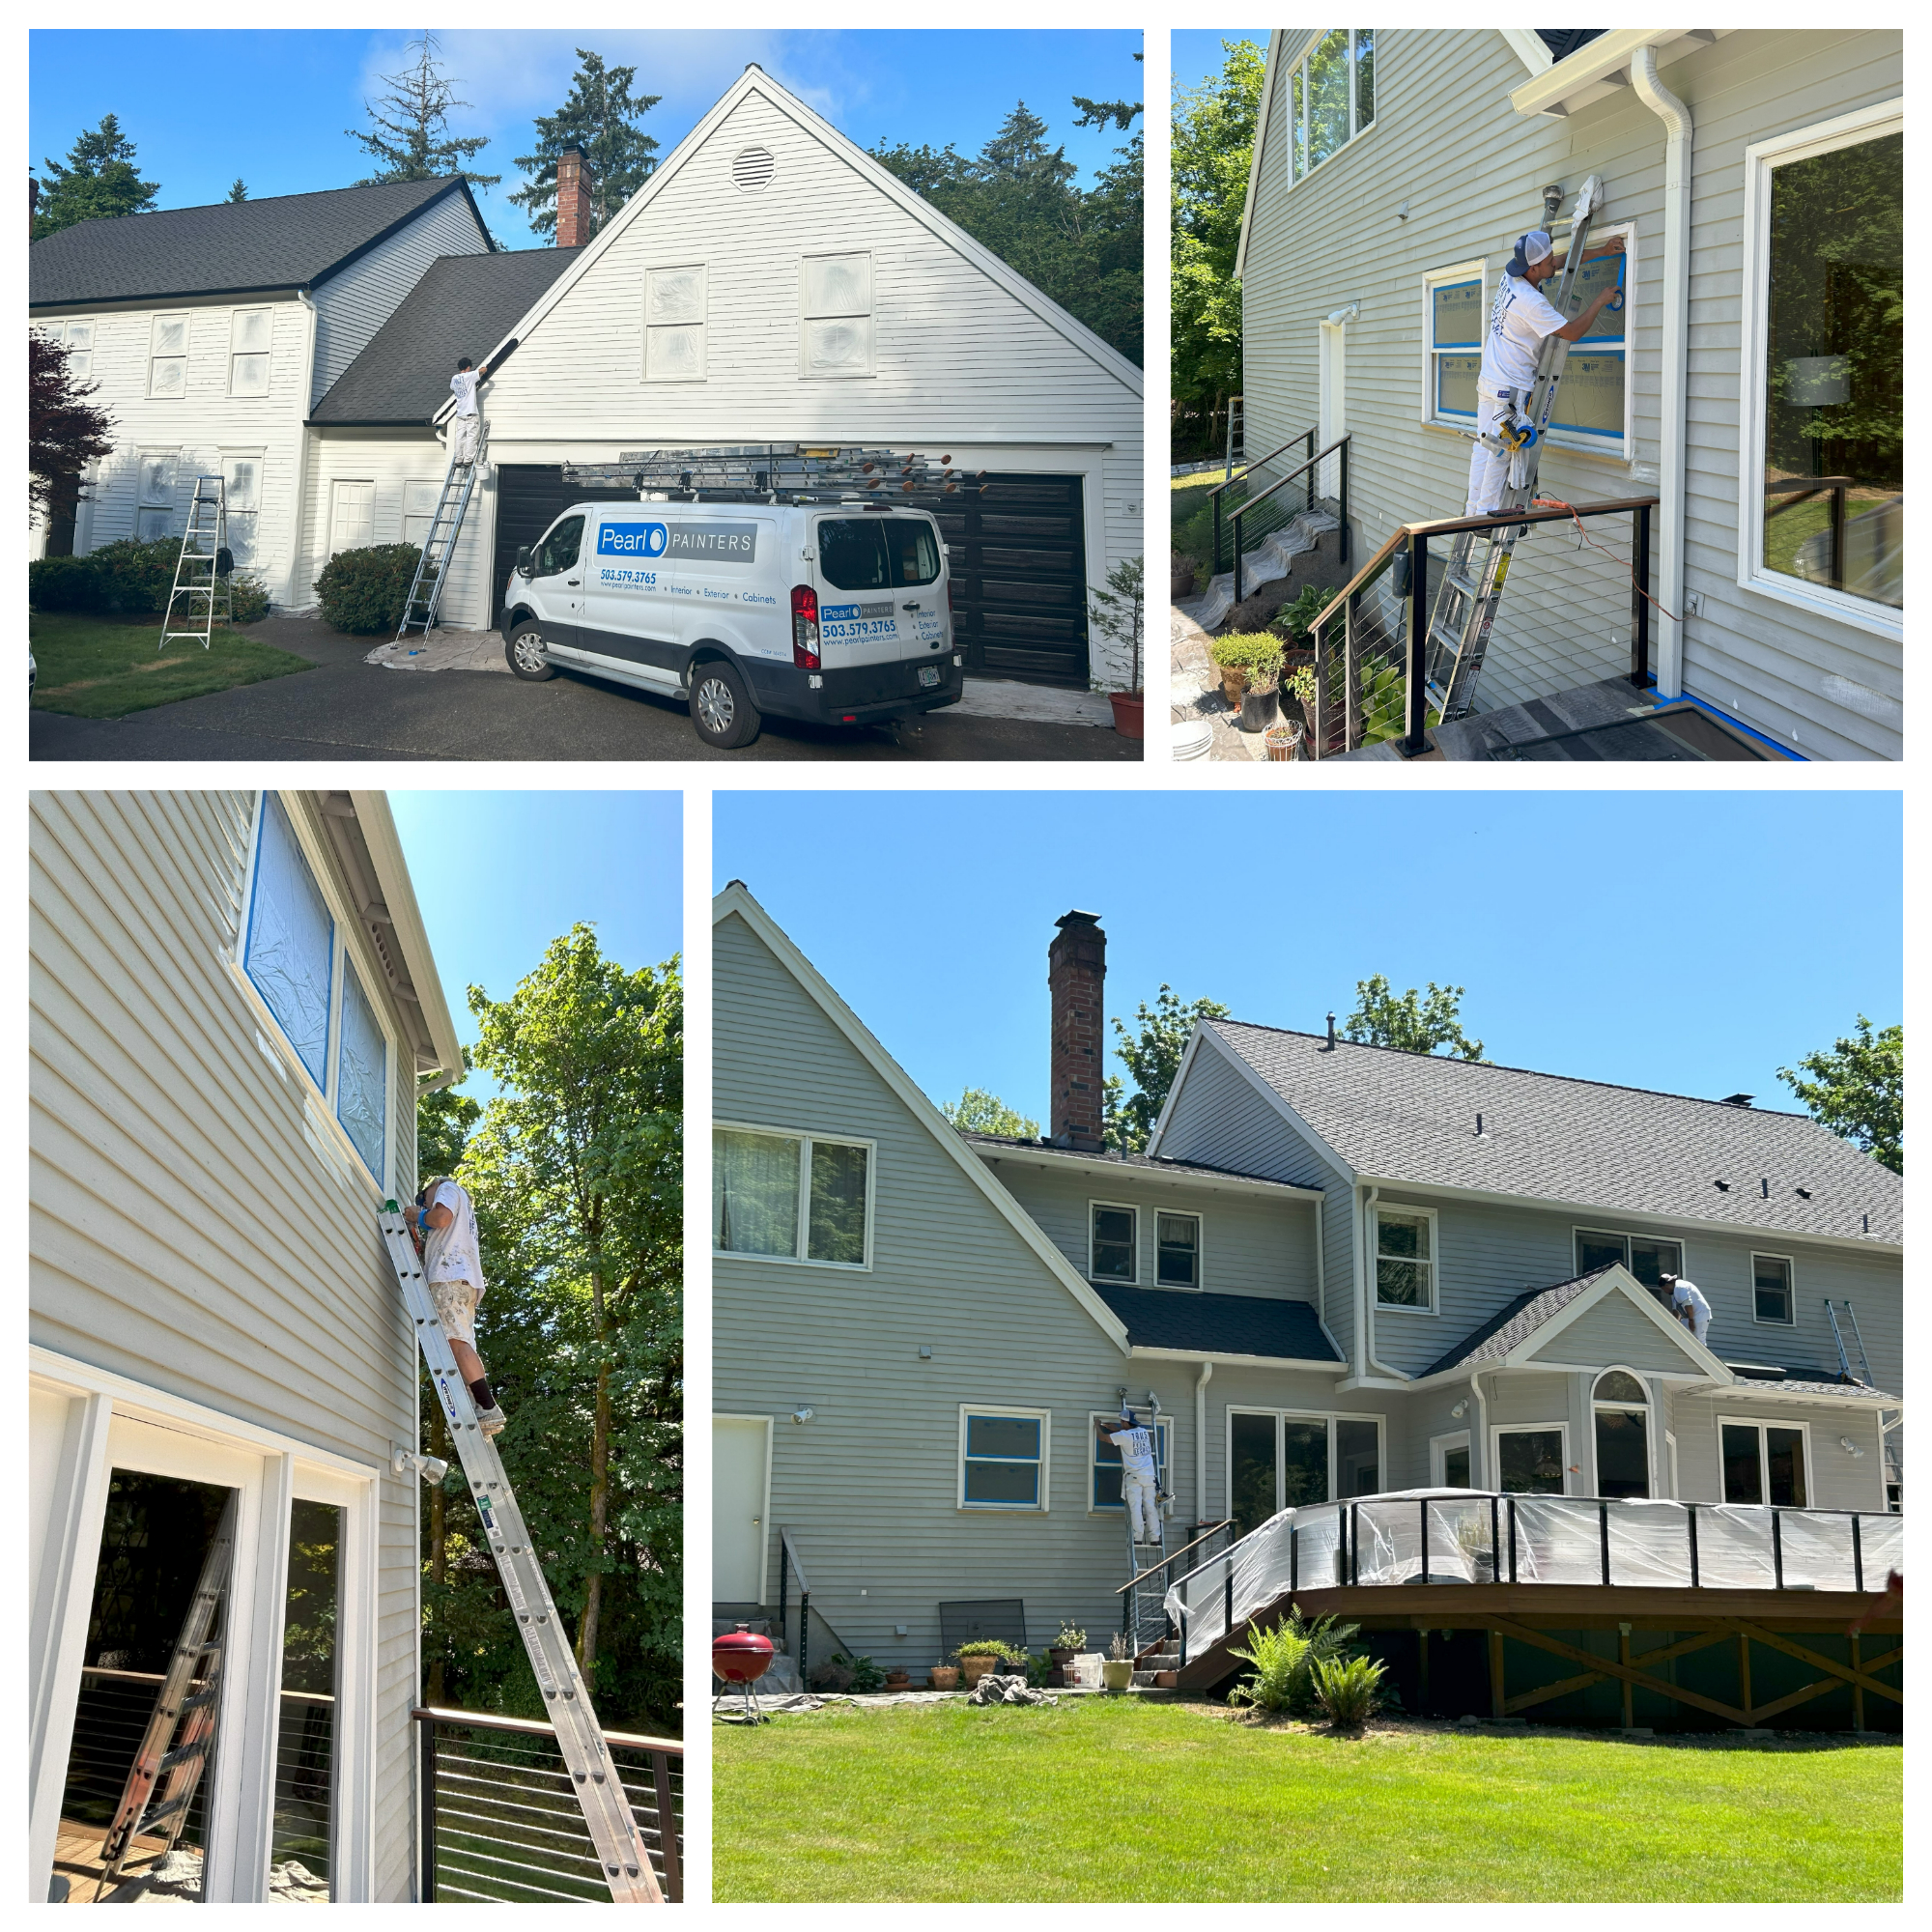 Four pictures of a man revitalizing a home by painting it from a ladder.